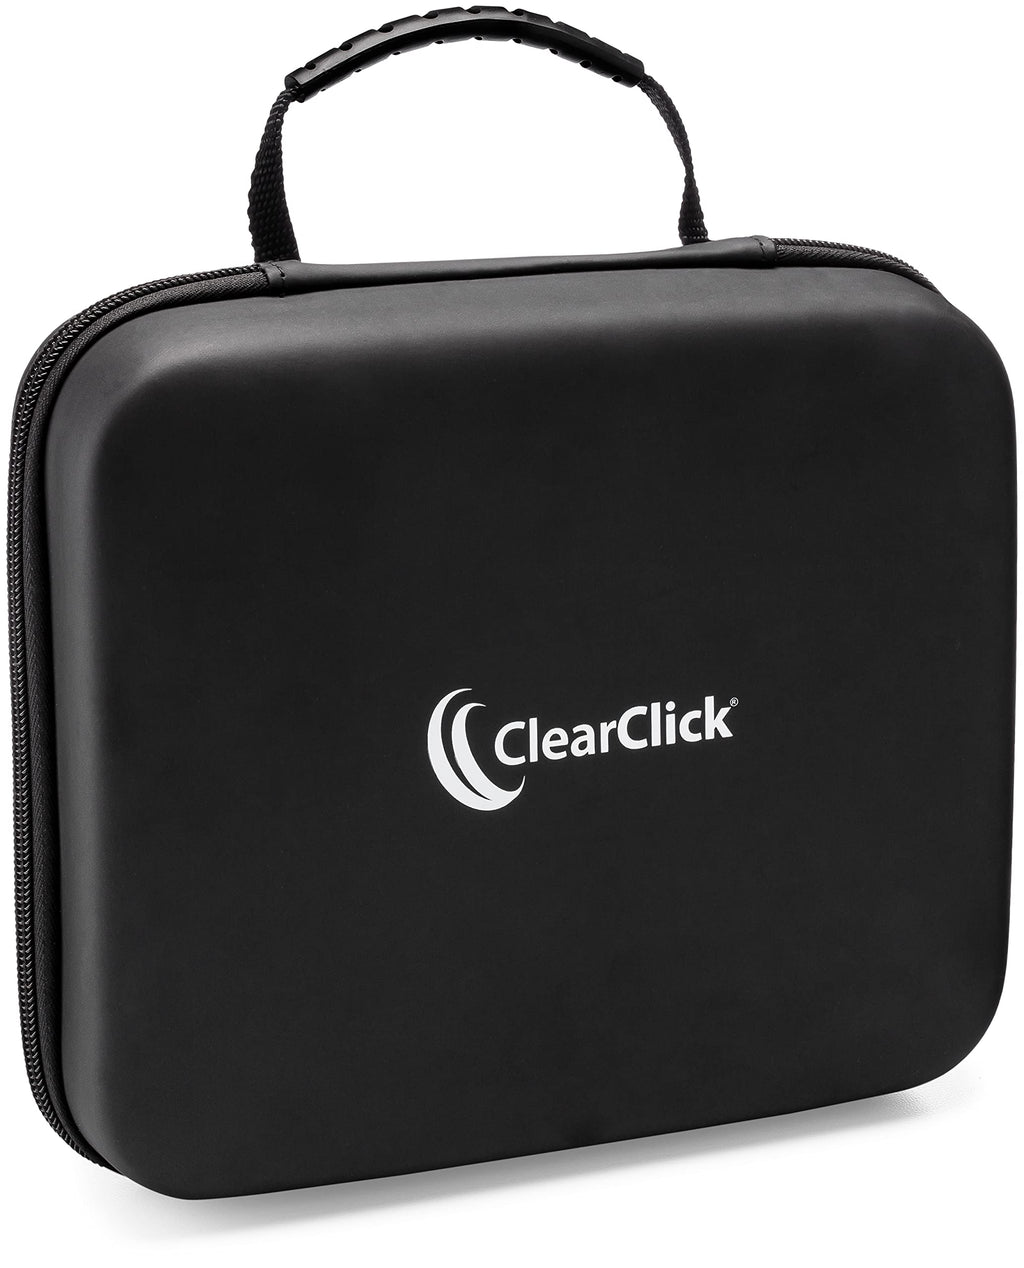 ClearClick Carrying & Storage Case - Fits Video to Digital Converter 2.0/3.0 or HD Video Capture Box Ultimate